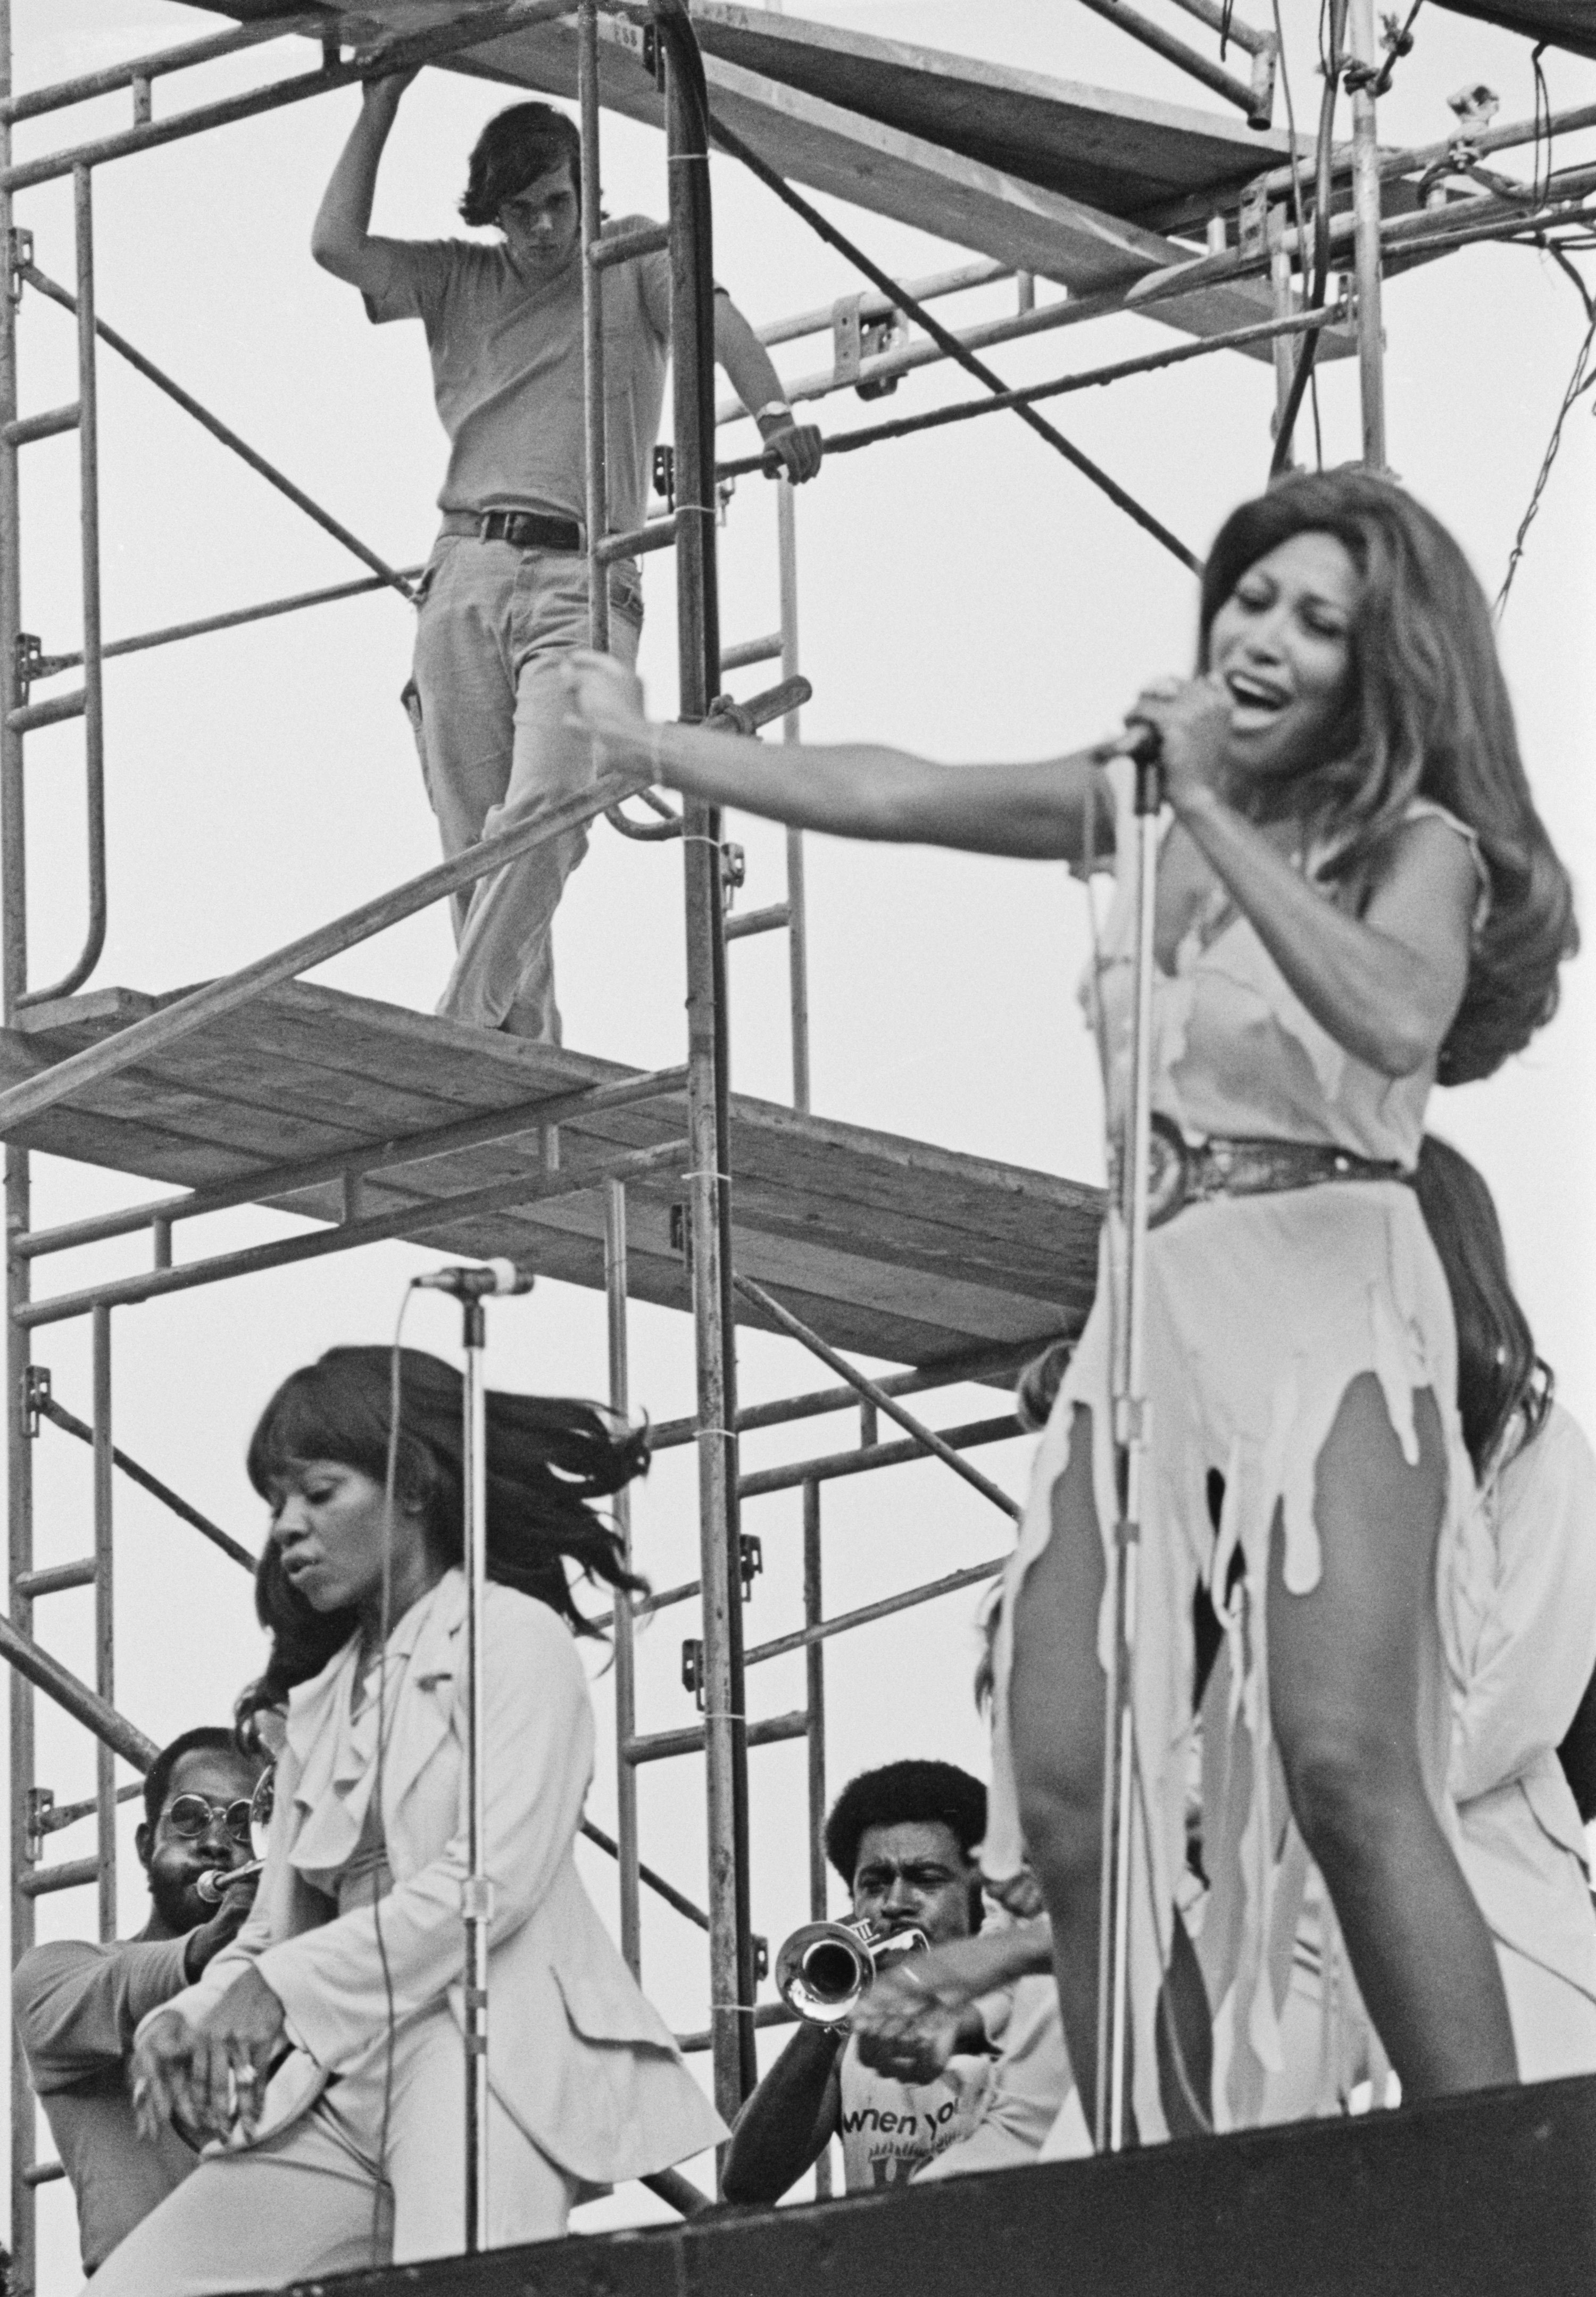 Tina Turner performing onstage with band